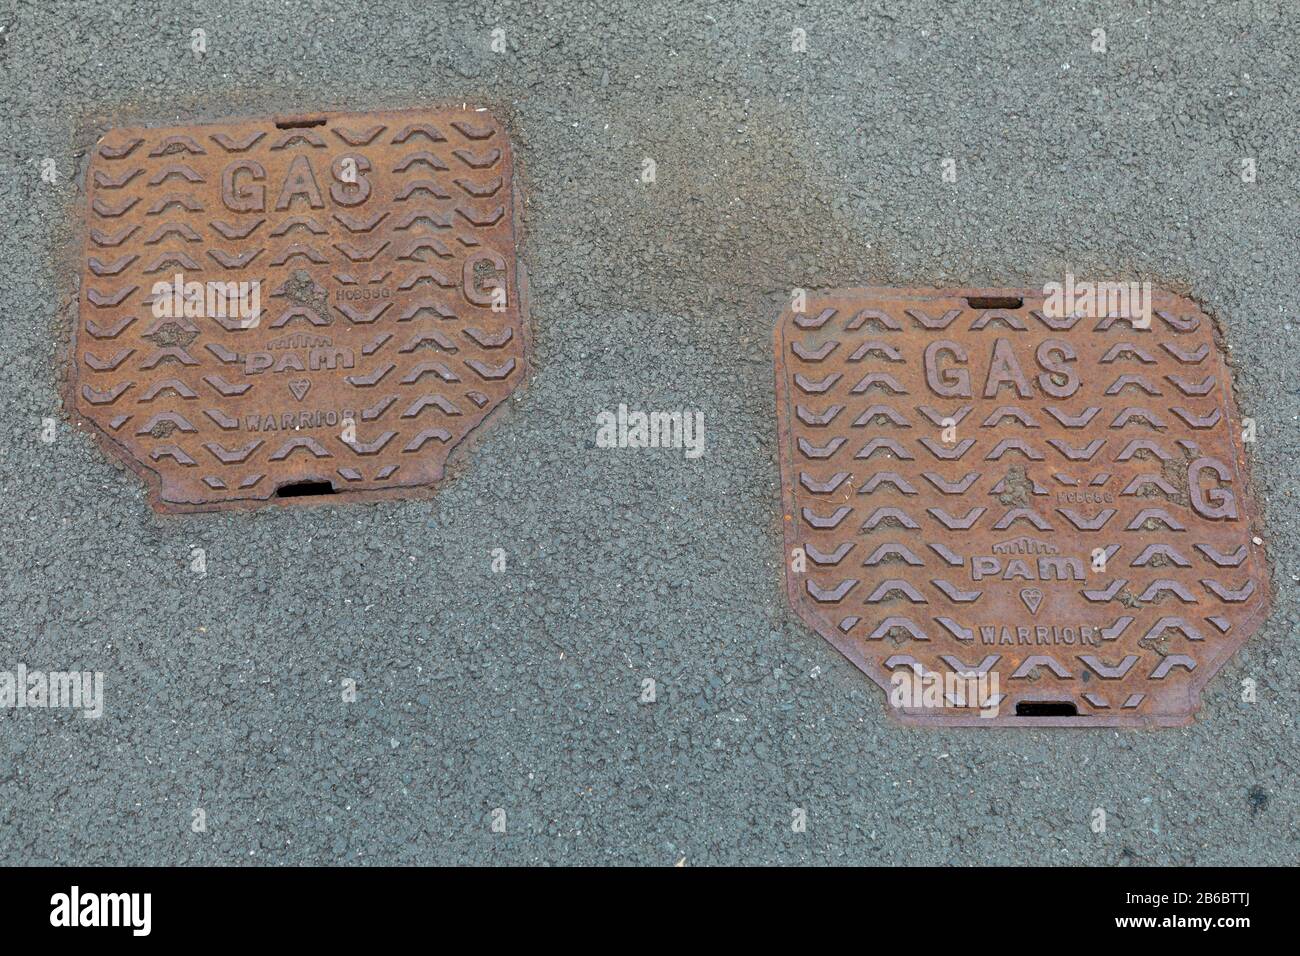 metal gas ground covers Wirral August 2019 Stock Photo